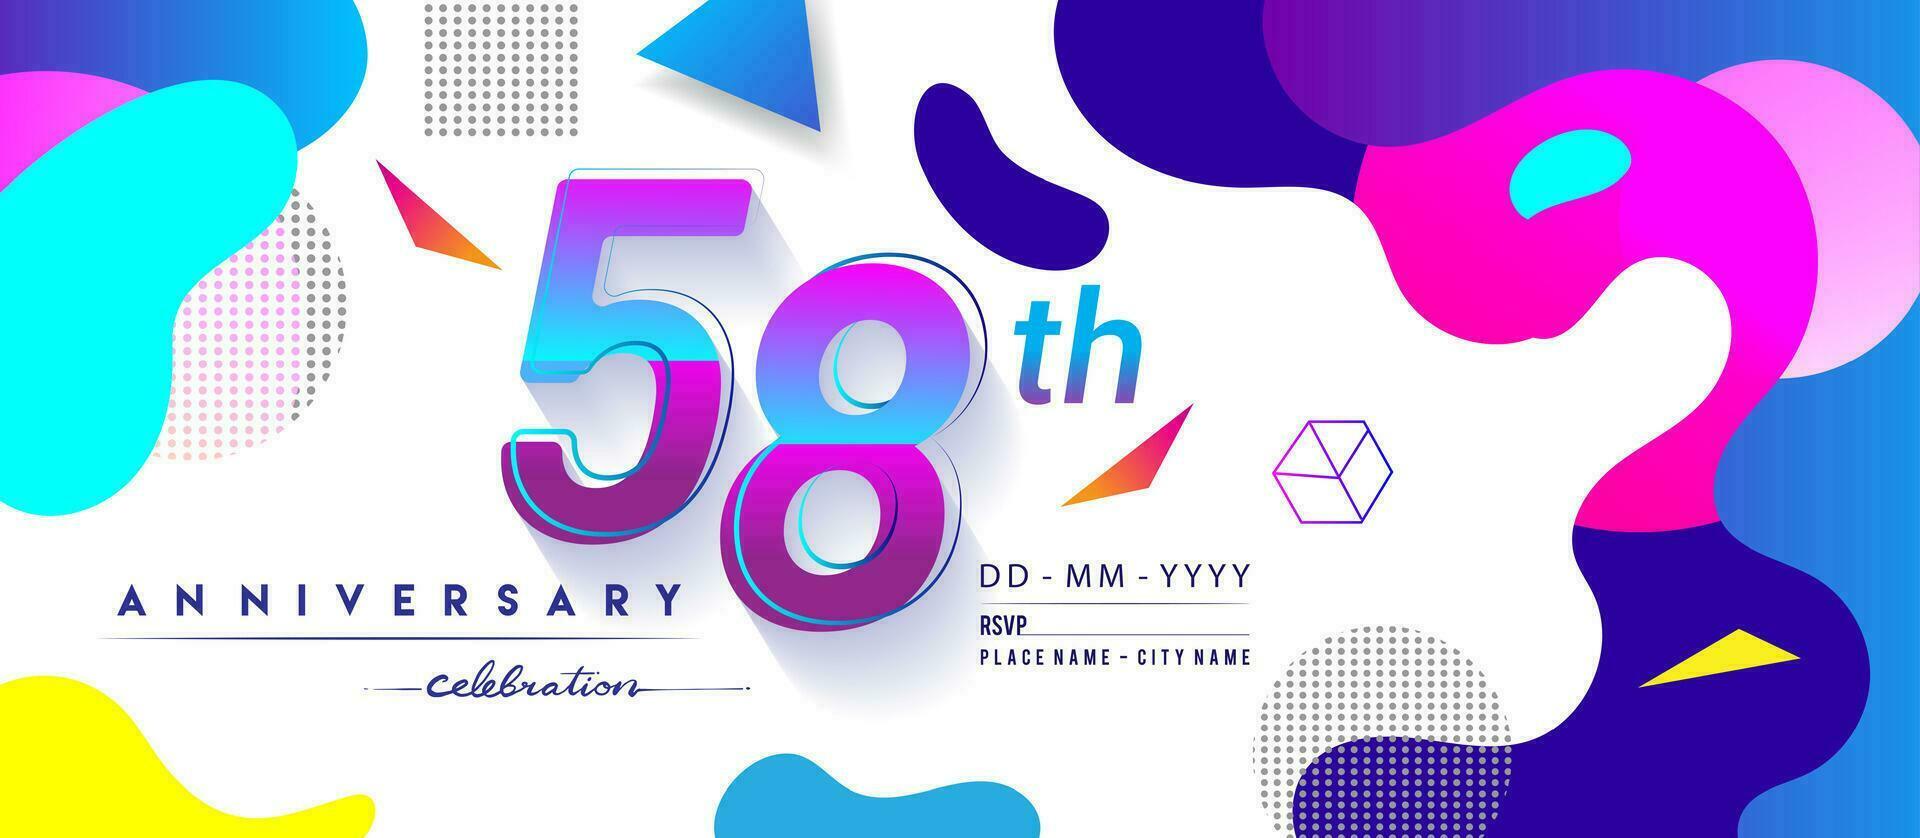 58th years anniversary logo, vector design birthday celebration with colorful geometric background and circles shape.